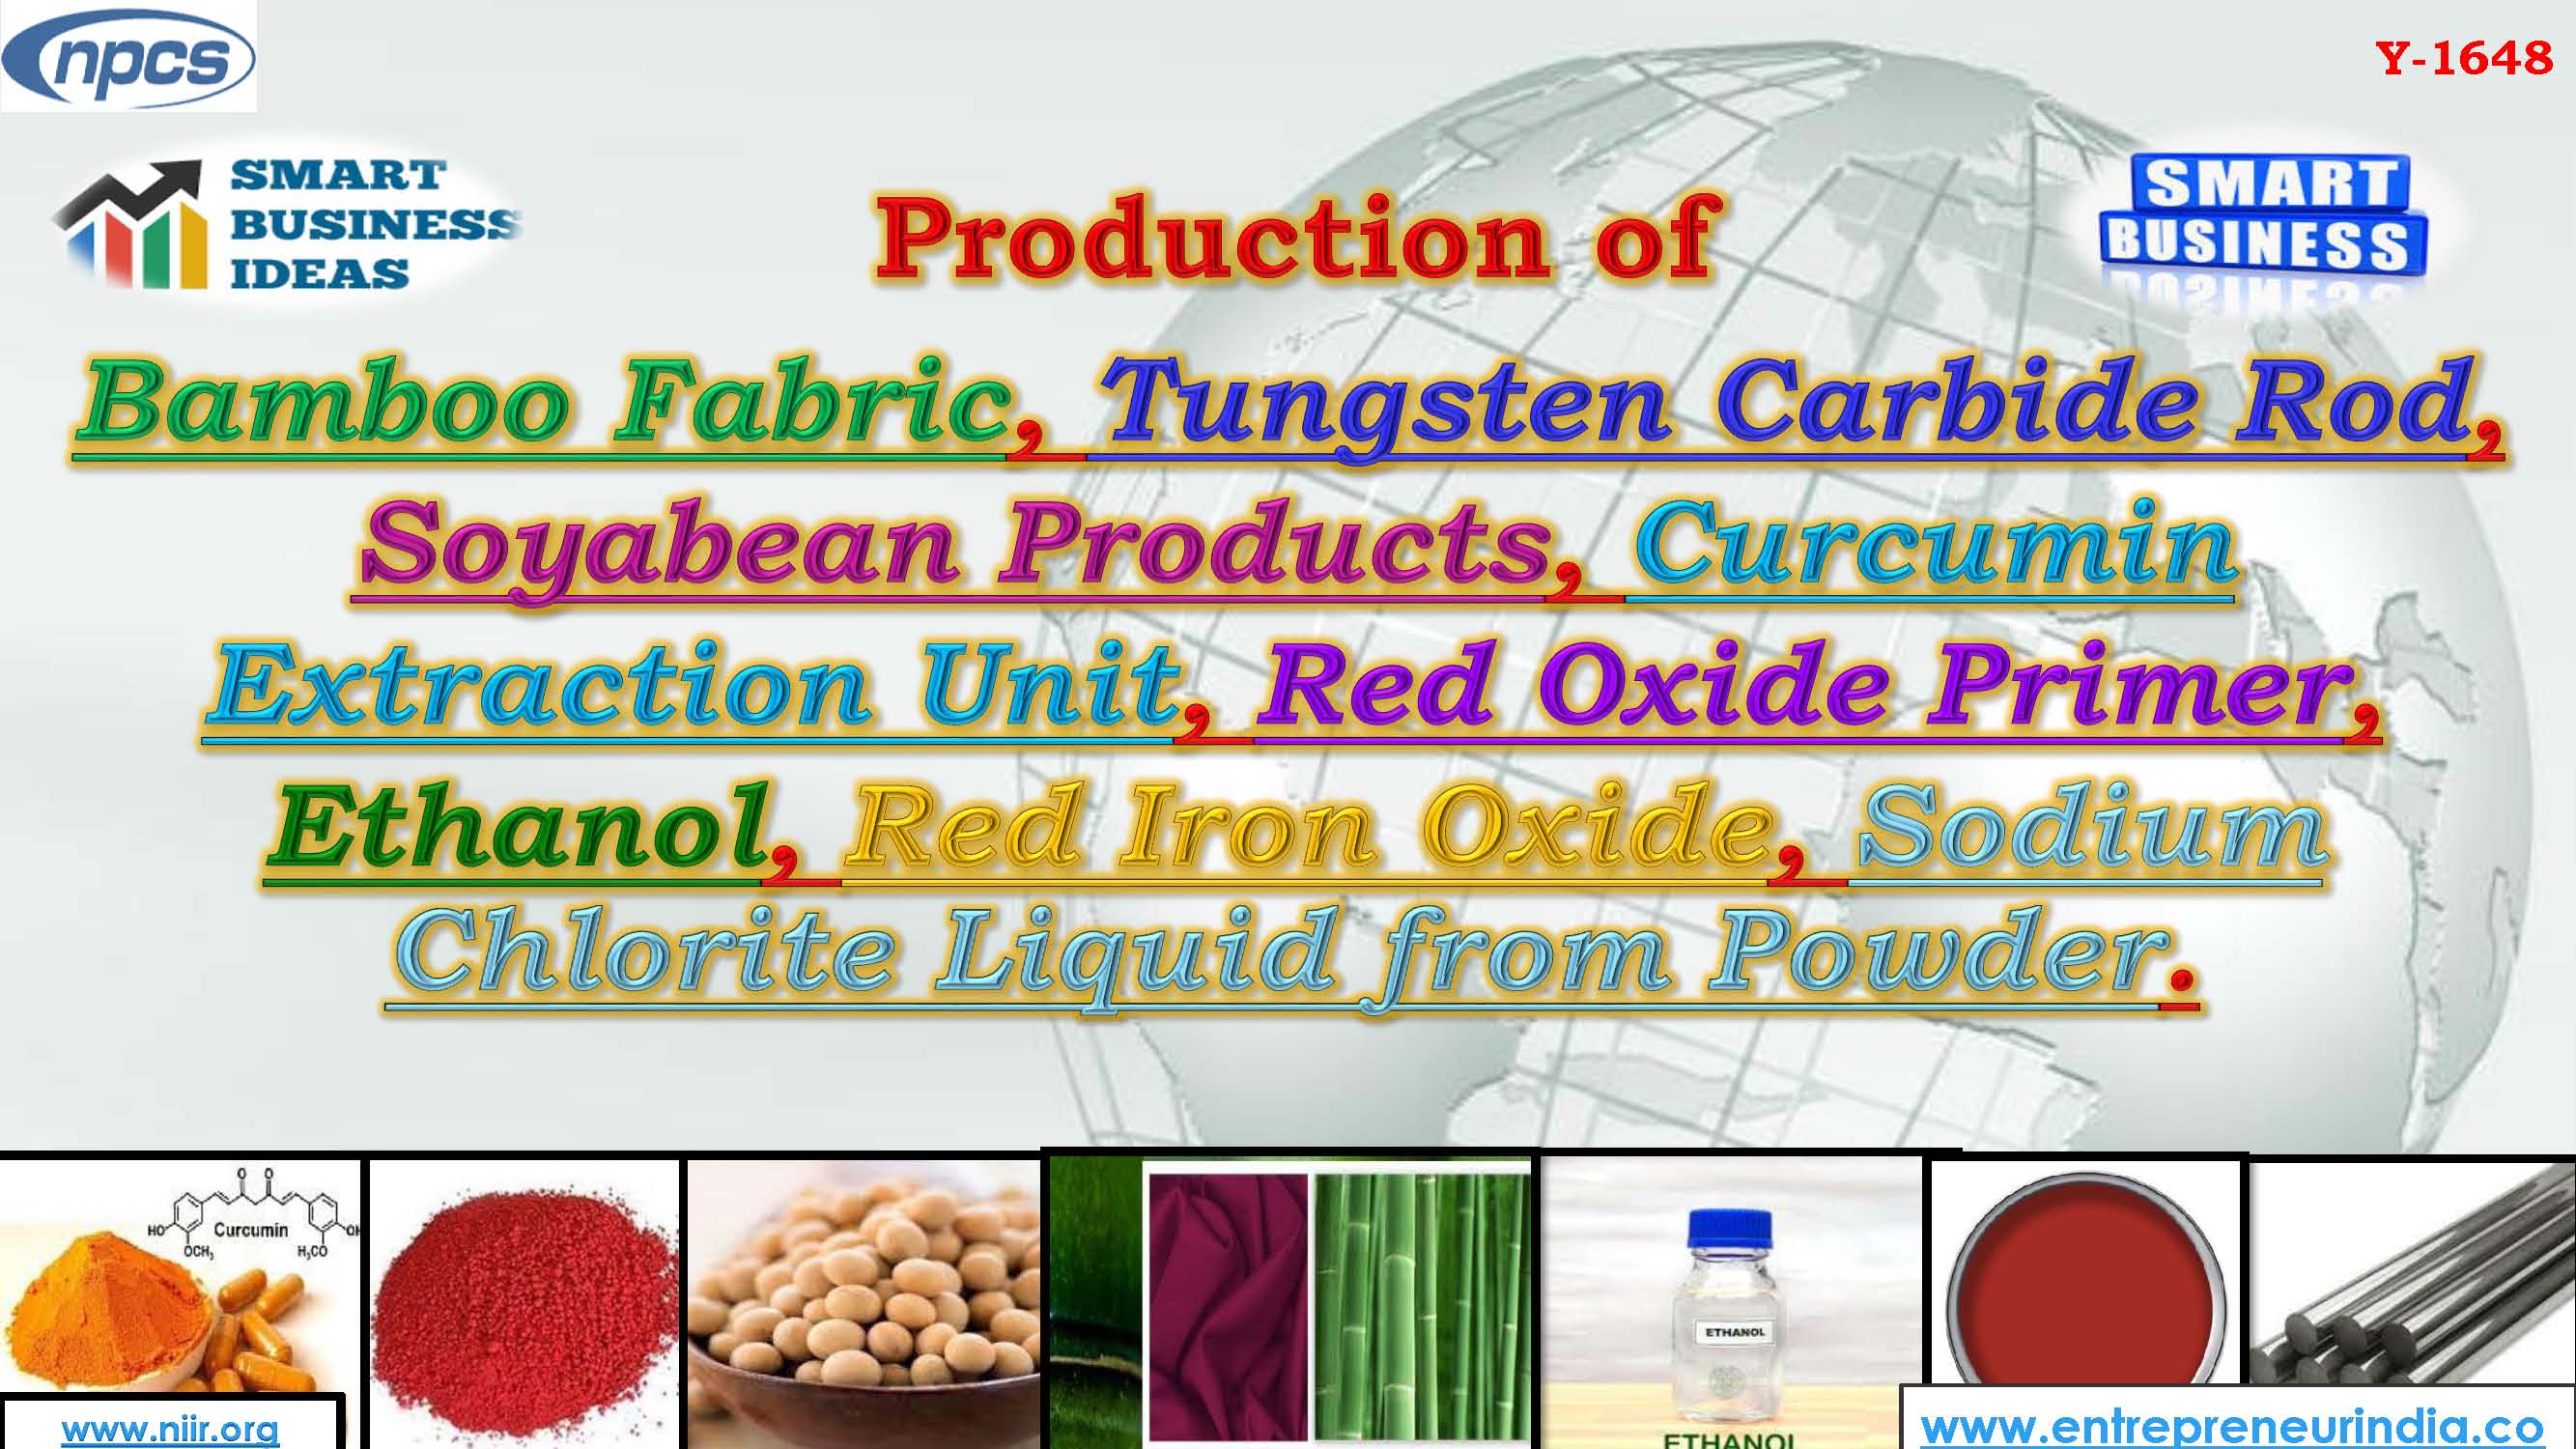 Production of  Bamboo Fabric, Tungsten Carbide Rod, Soyabean Products, Curcumin Extraction Unit, Red Oxide Primer, Ethanol, Red Iron Oxide, Sodium Chlorite Liquid from Powder